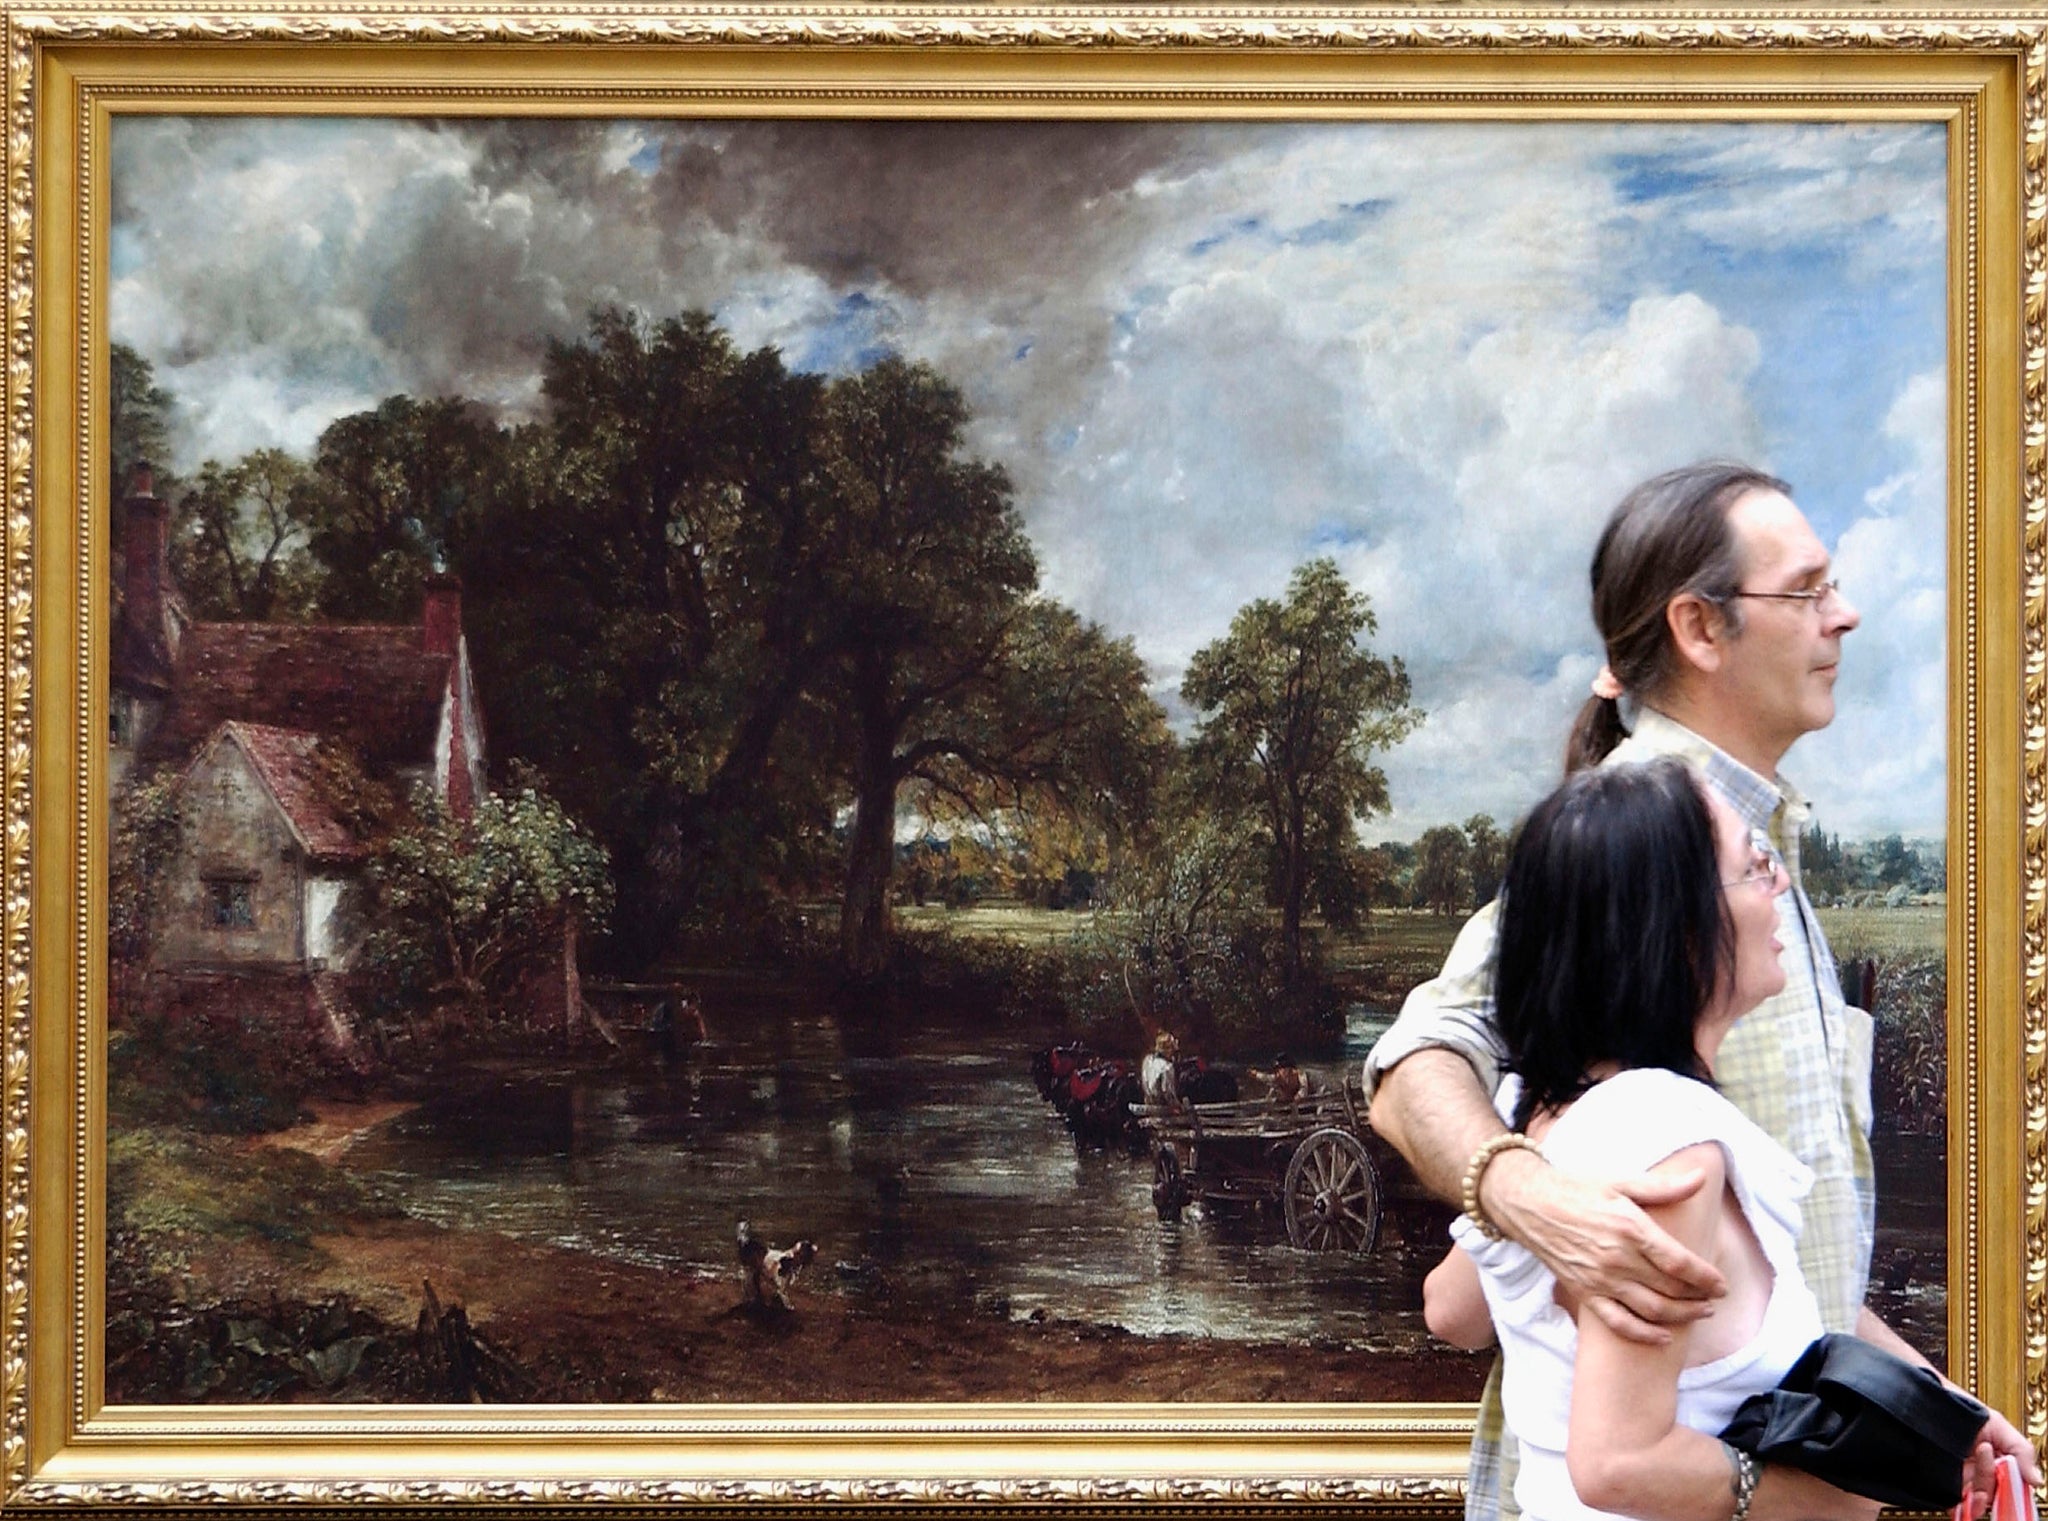 The Hay Wain by Constable has been attacked by a protester at the National Gallery